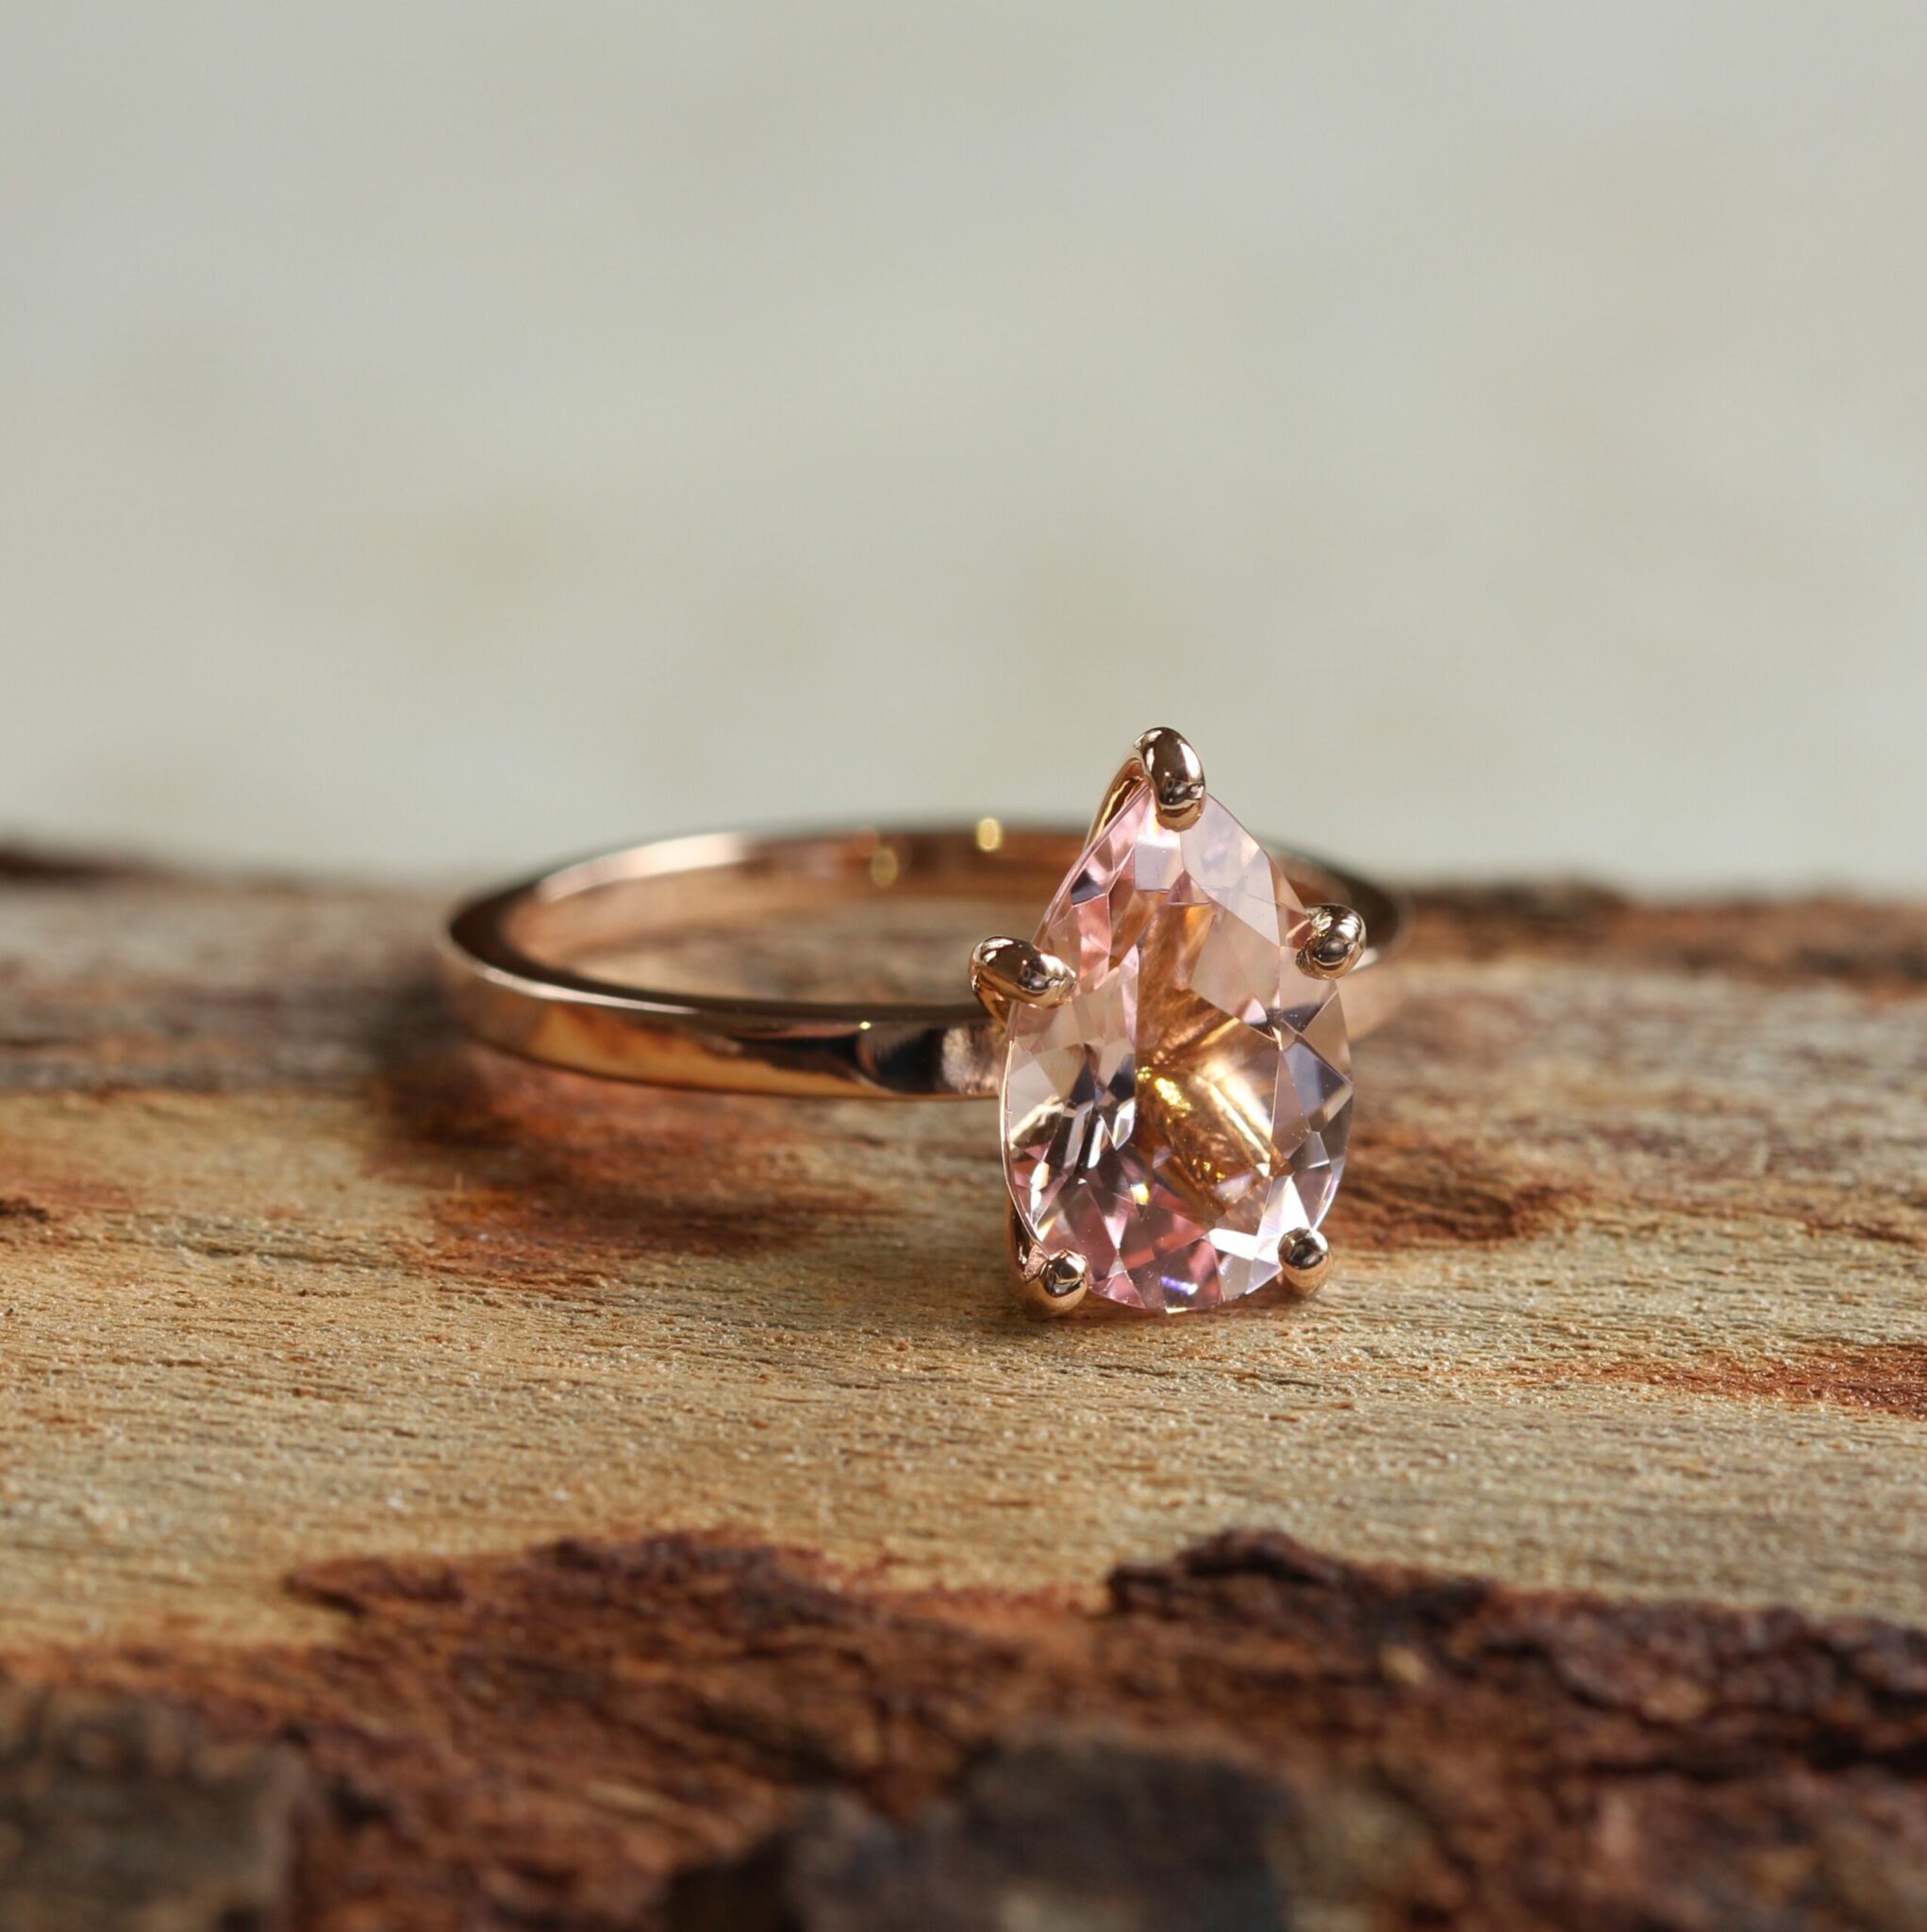 true-pink-morganite-solitaire-engagement-ring-12x8mm-pear-cut-six-prongs-14k-rose-gold-LS5951-front-wood